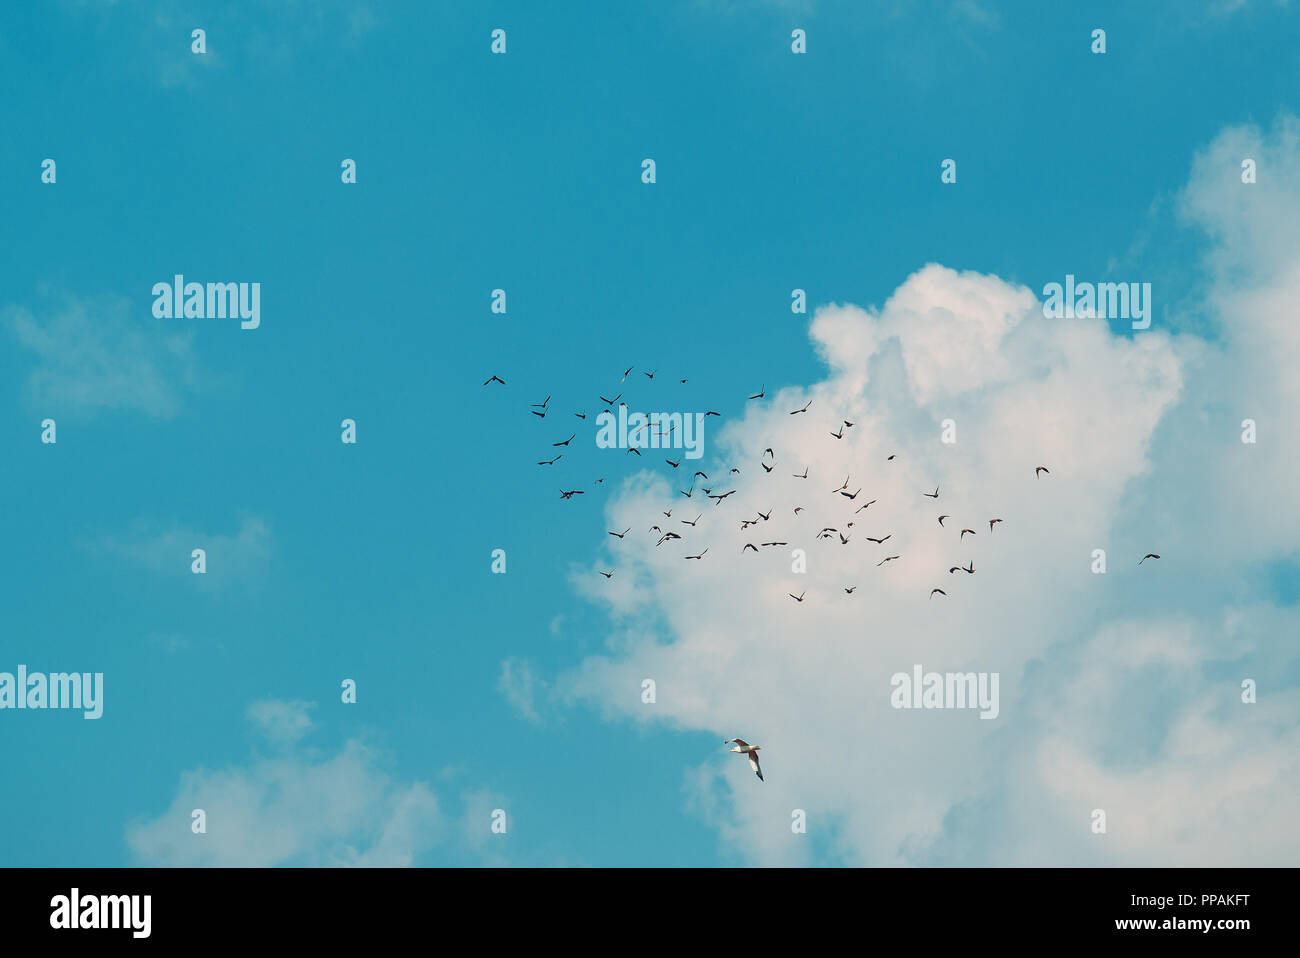 Flock of birds flying together across the sky Stock Photo